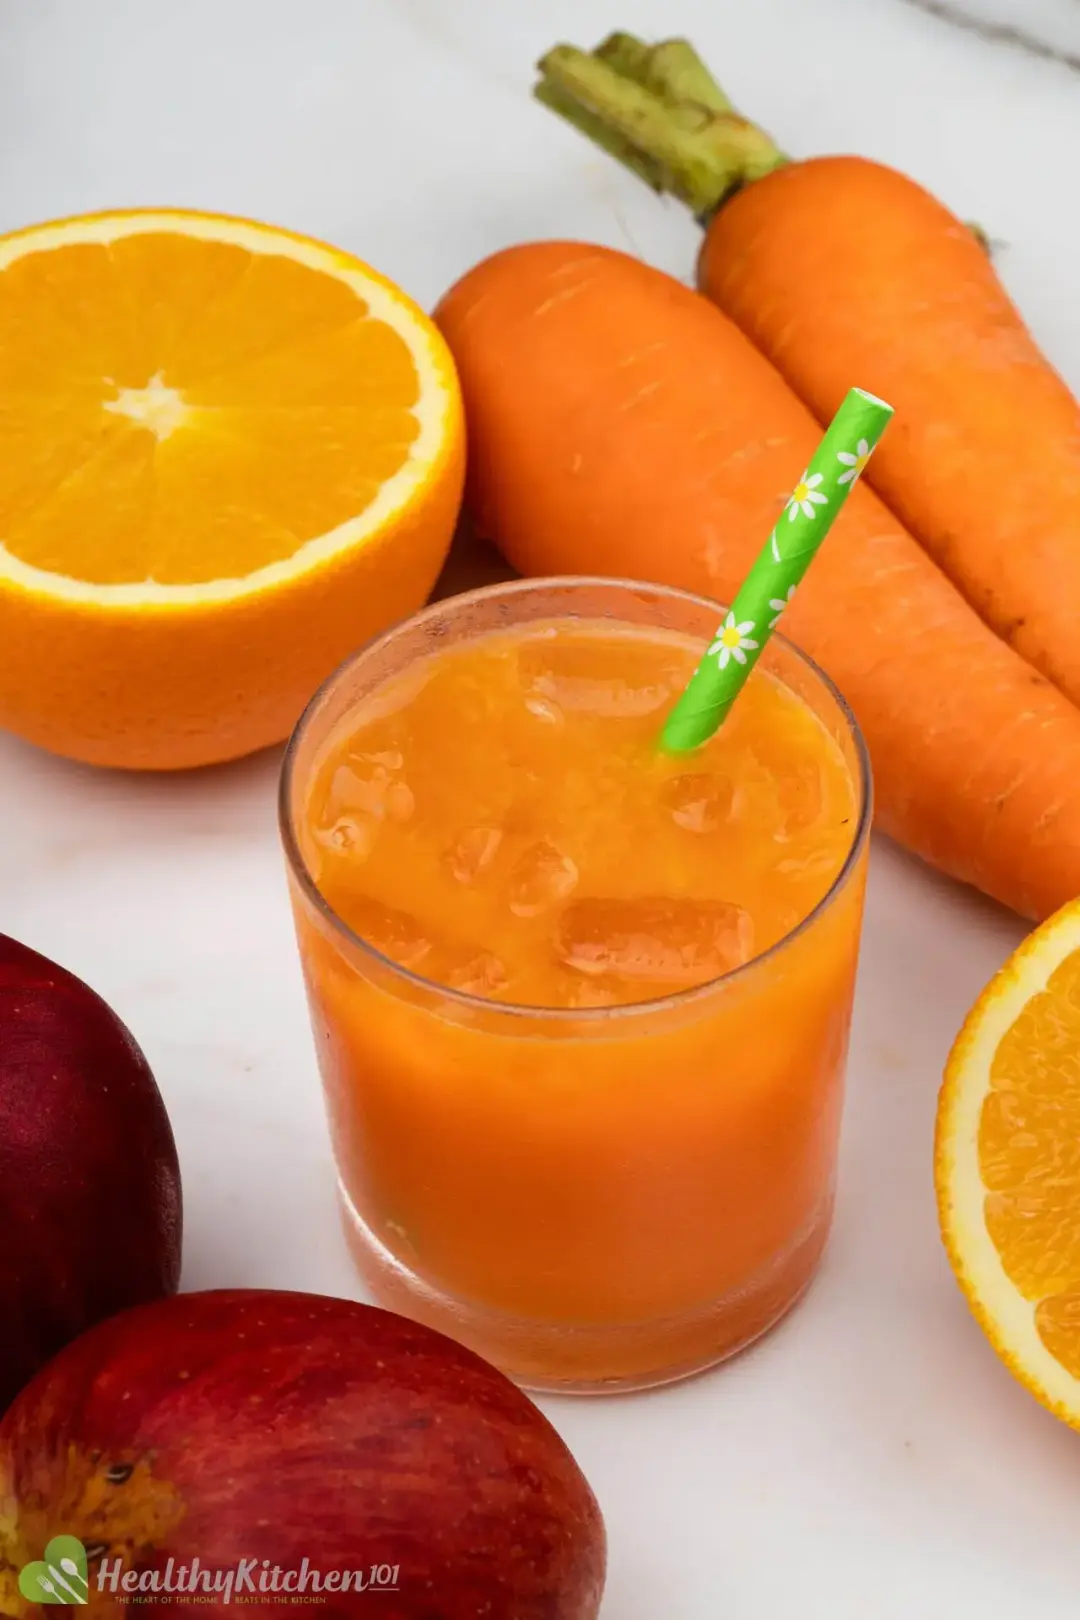 A short iced glass of carrot and apple drink, next to whole carrots, red apples, and orange halves